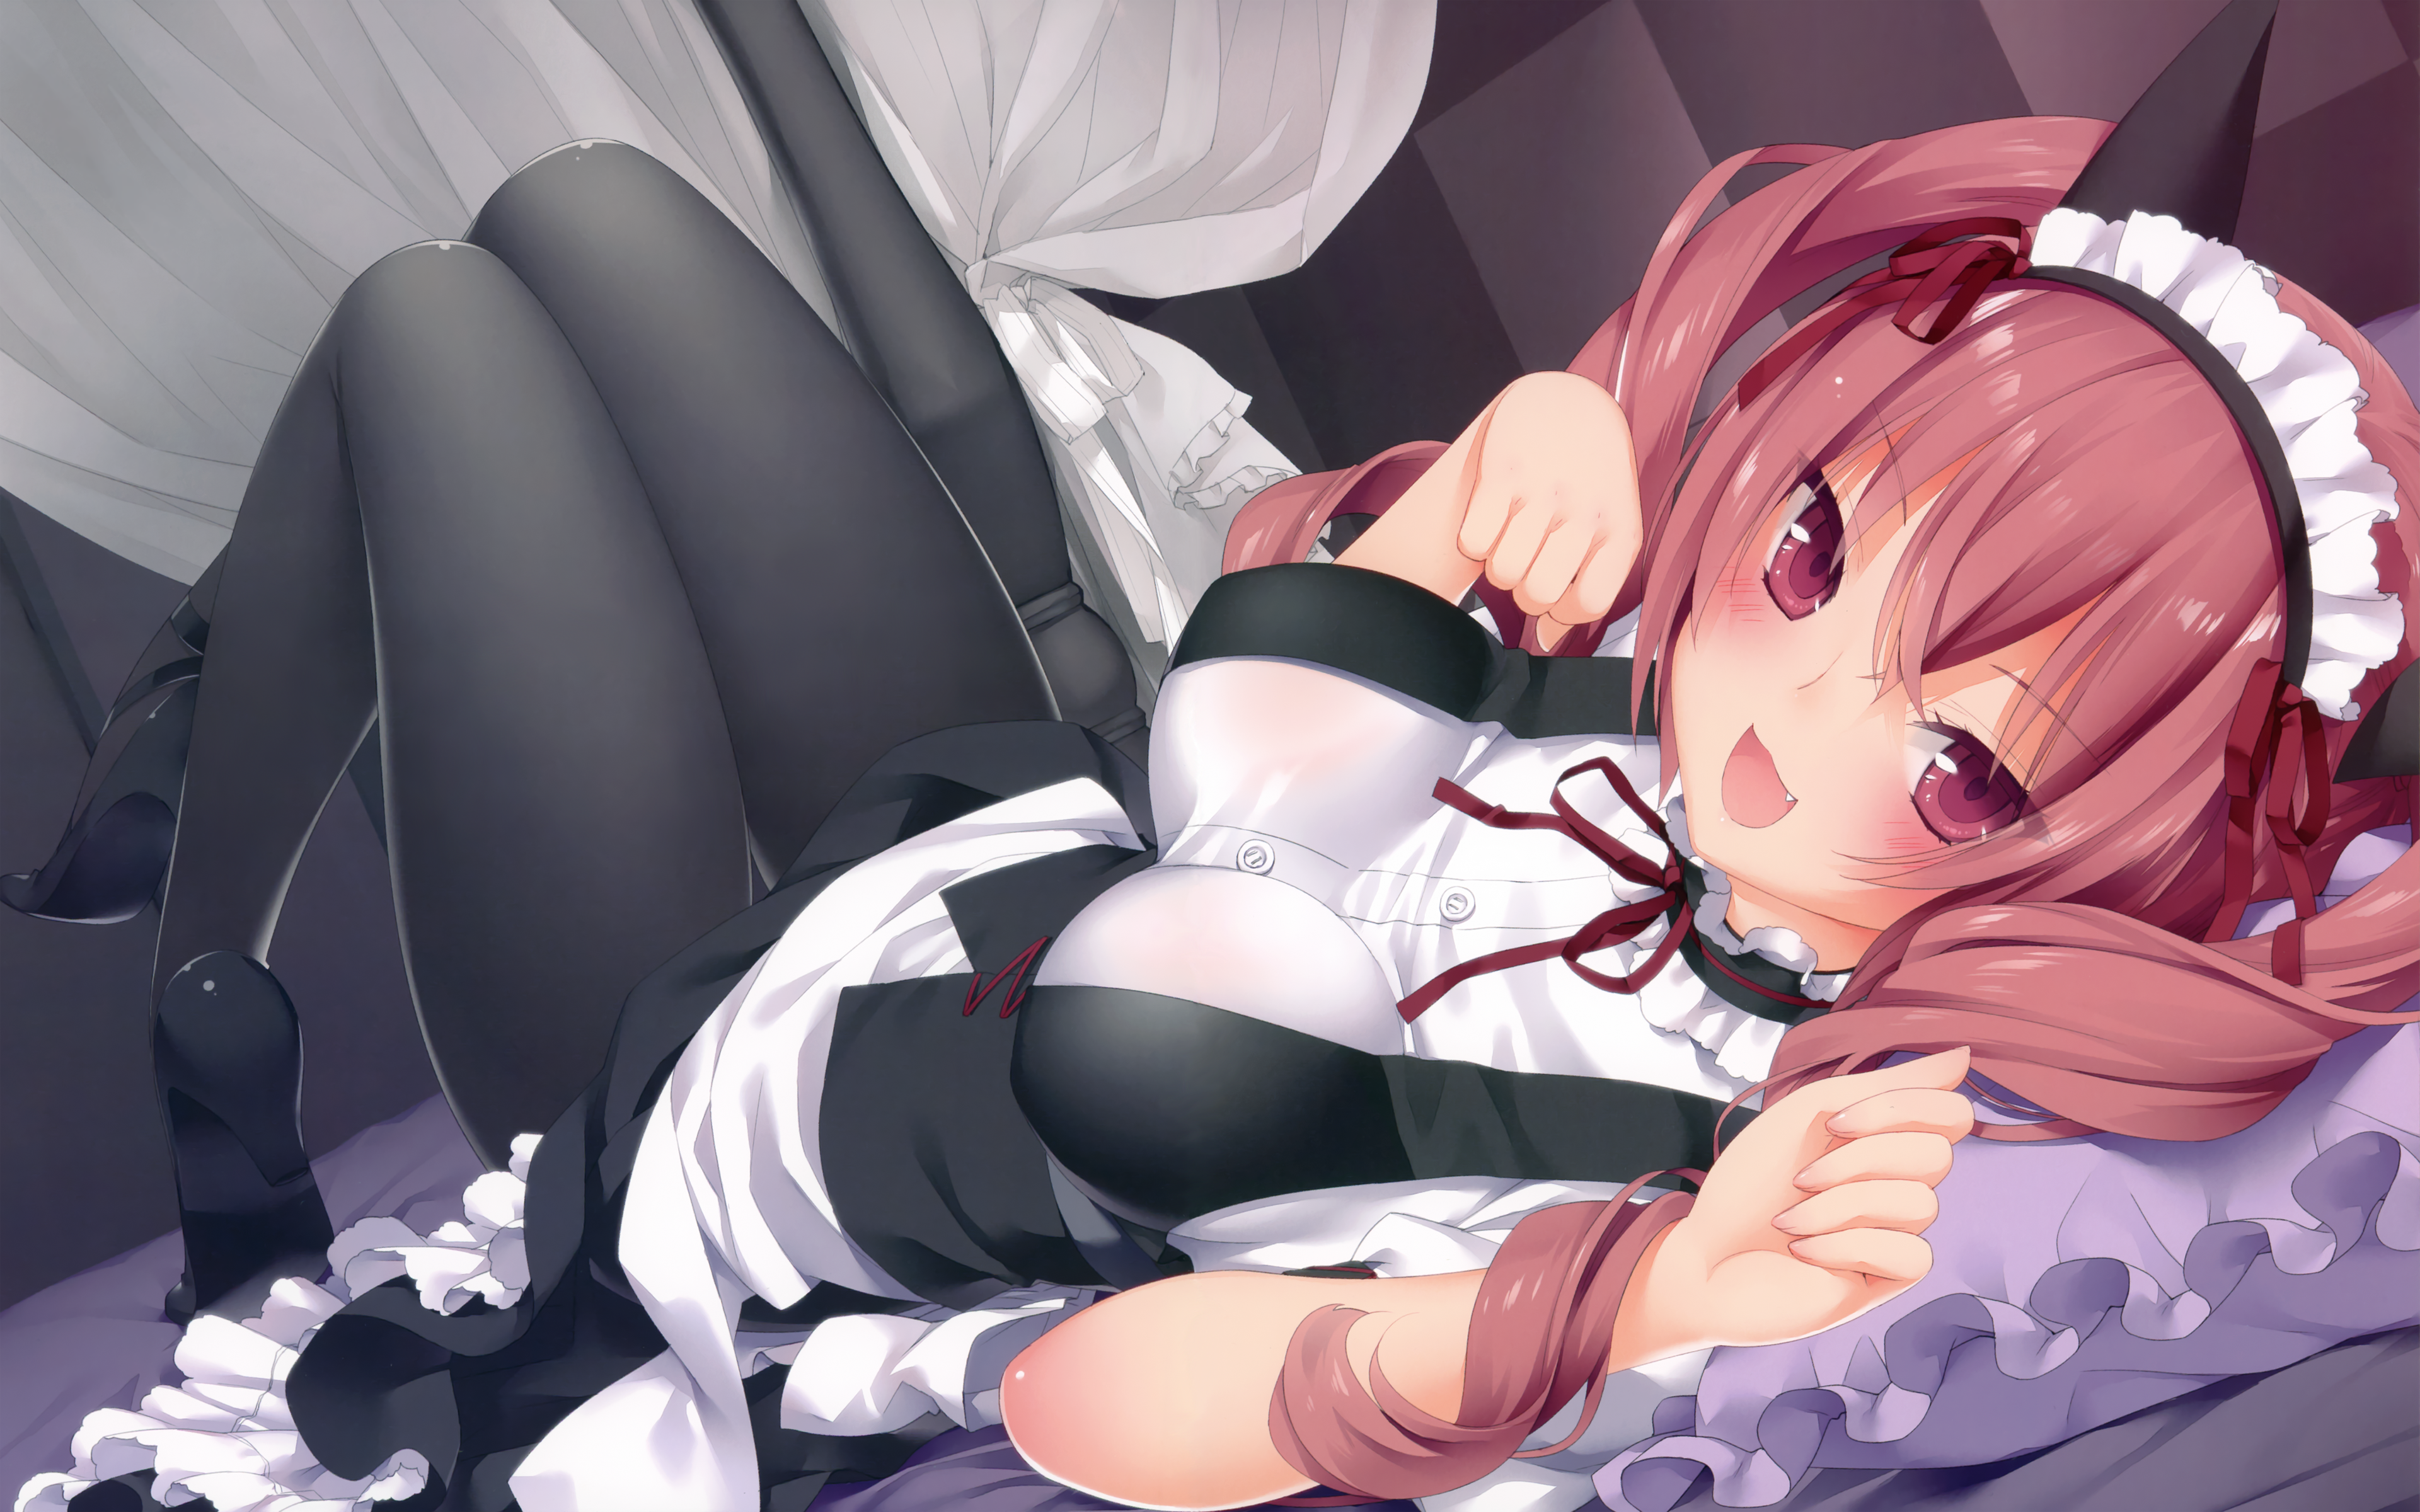 Faris Nyannyan Steins Gate Animal Ears Maid Anime Girls Maid Outfit Blushing Looking At Viewer Lying 3840x2400